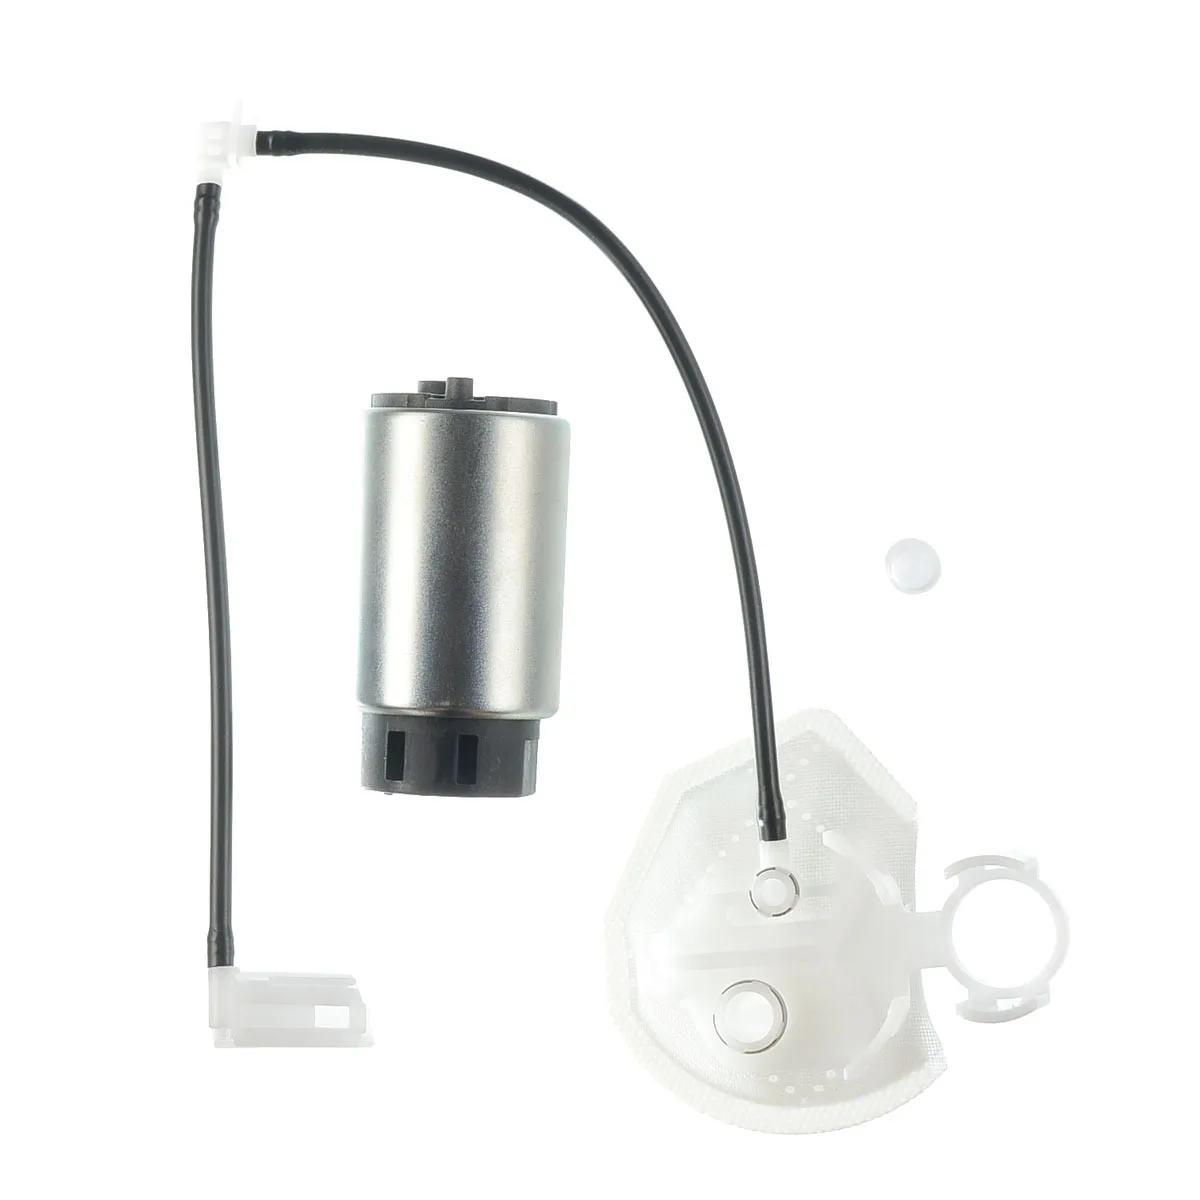 

In-stock CN US Electric Fuel Pump with Strainer for Lexus RX350 Toyota Highlander 07-10 V6 3.5L E8866